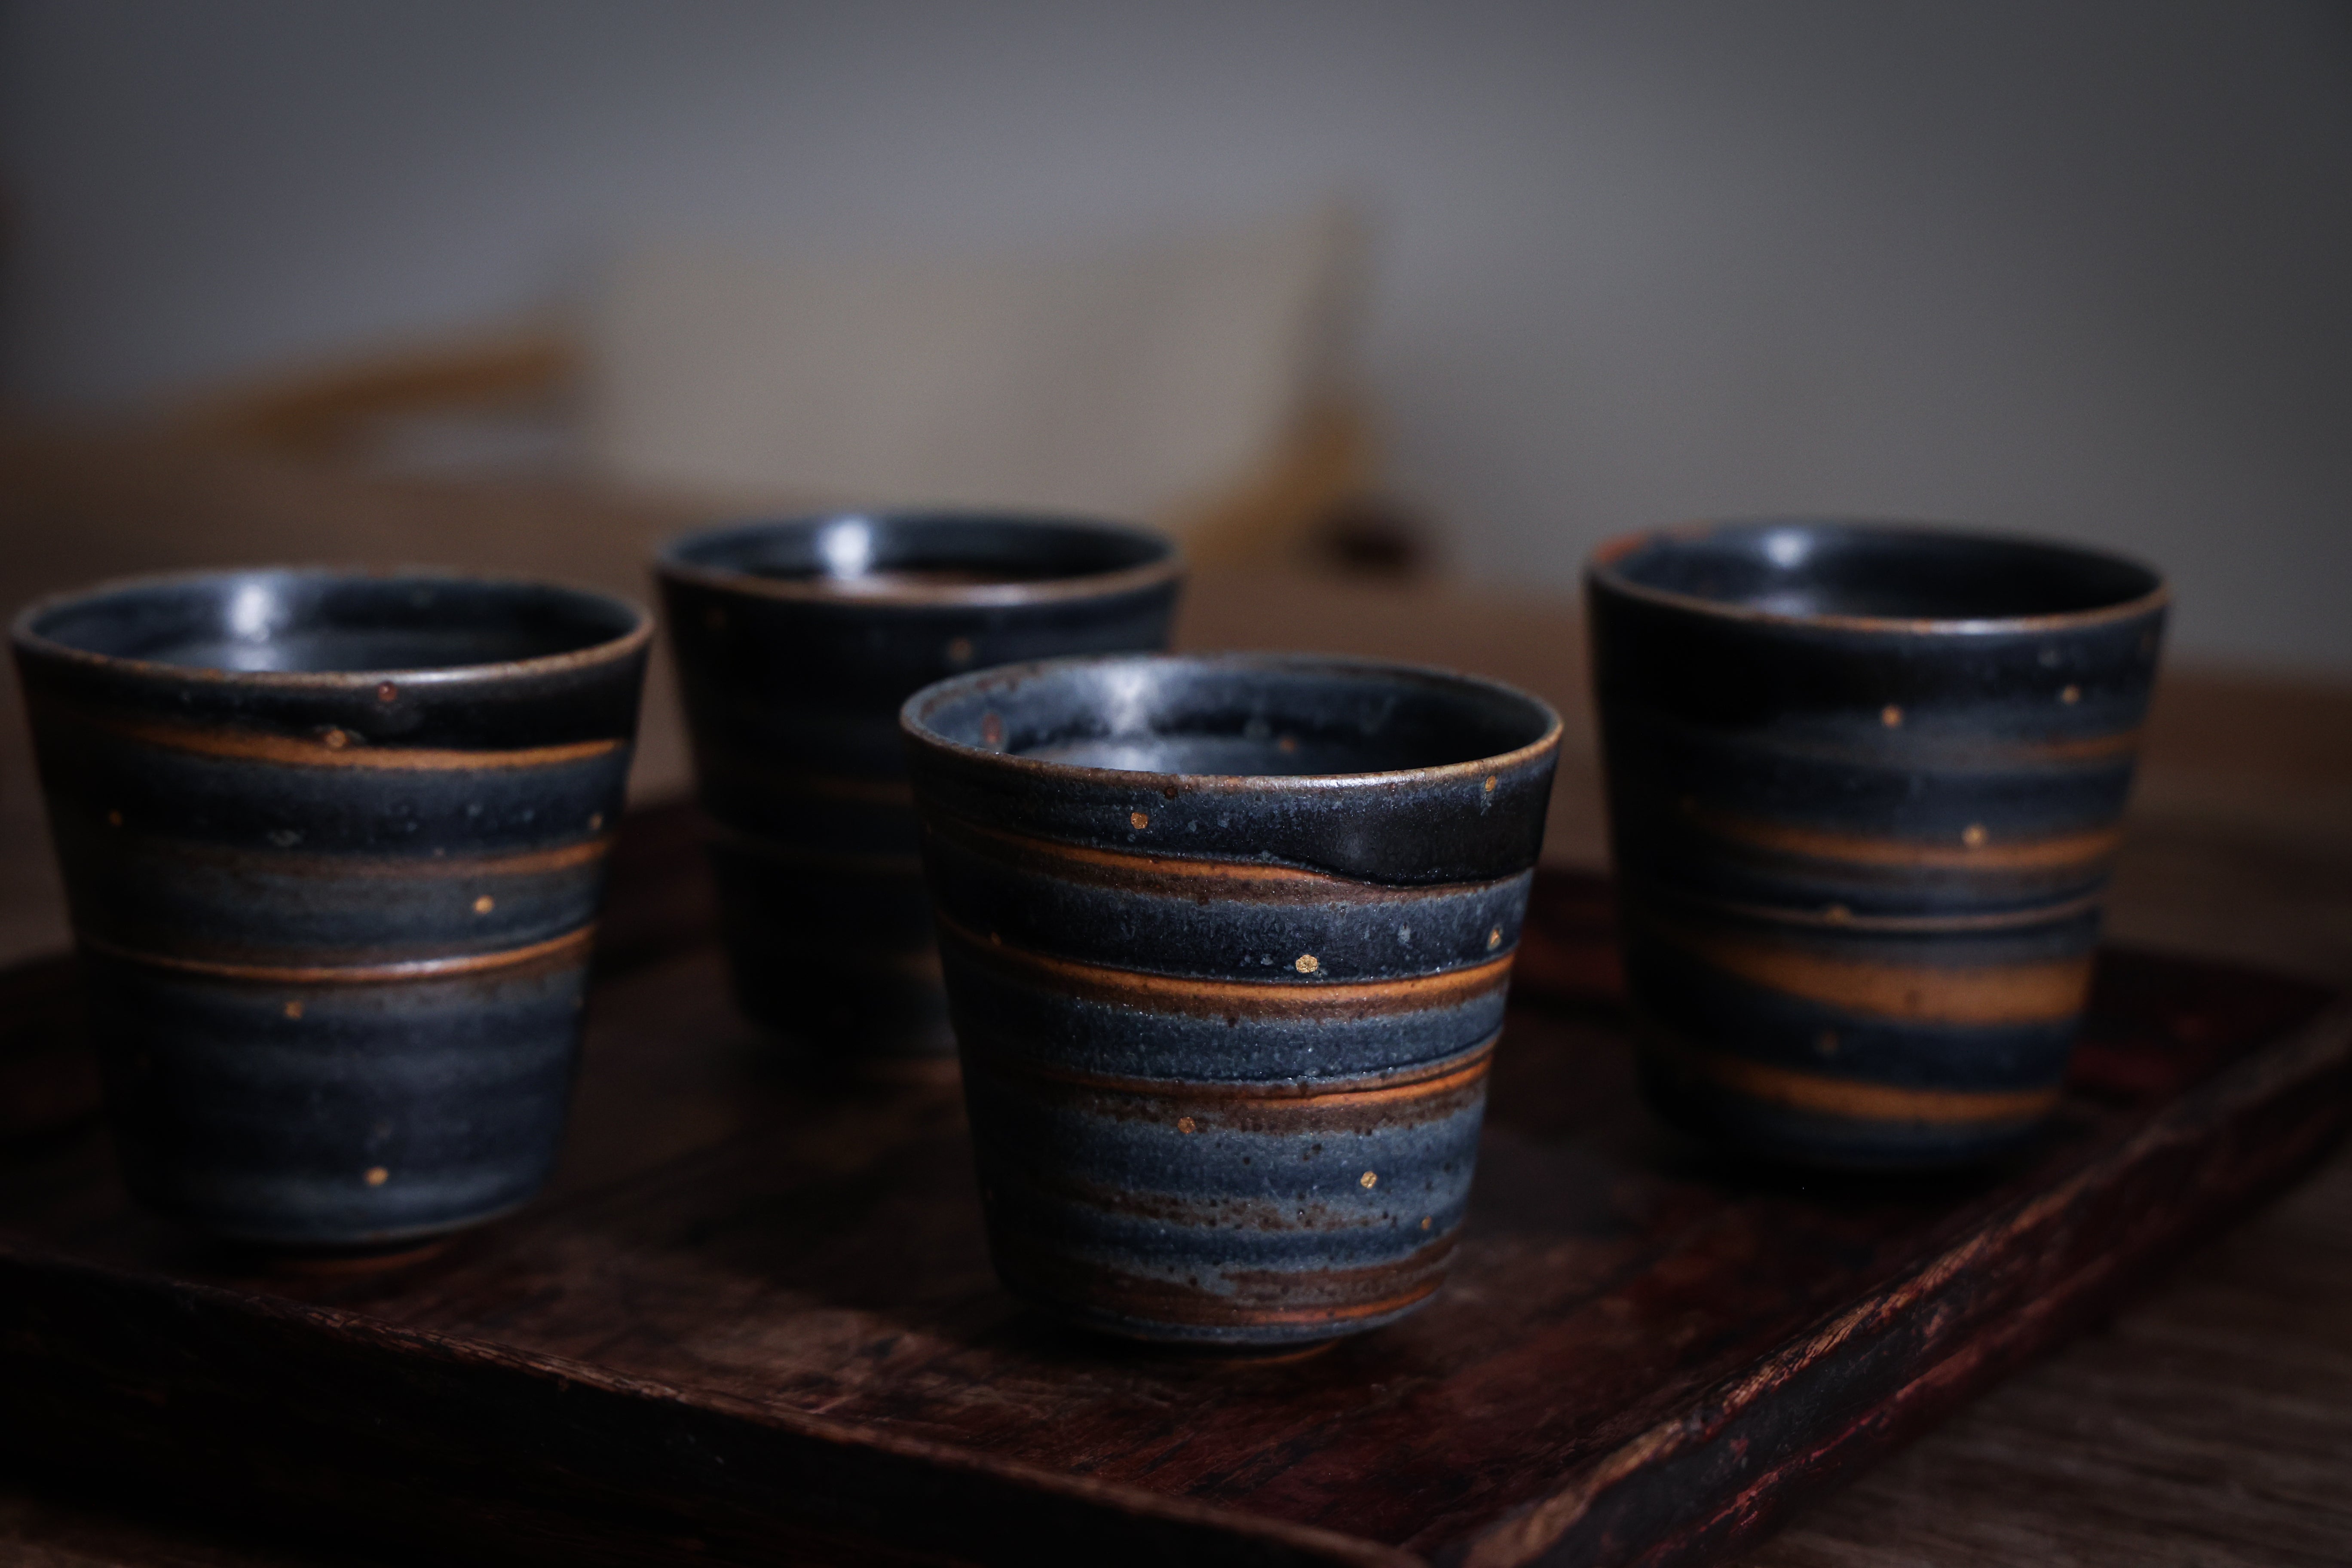 Bian Starry Cup